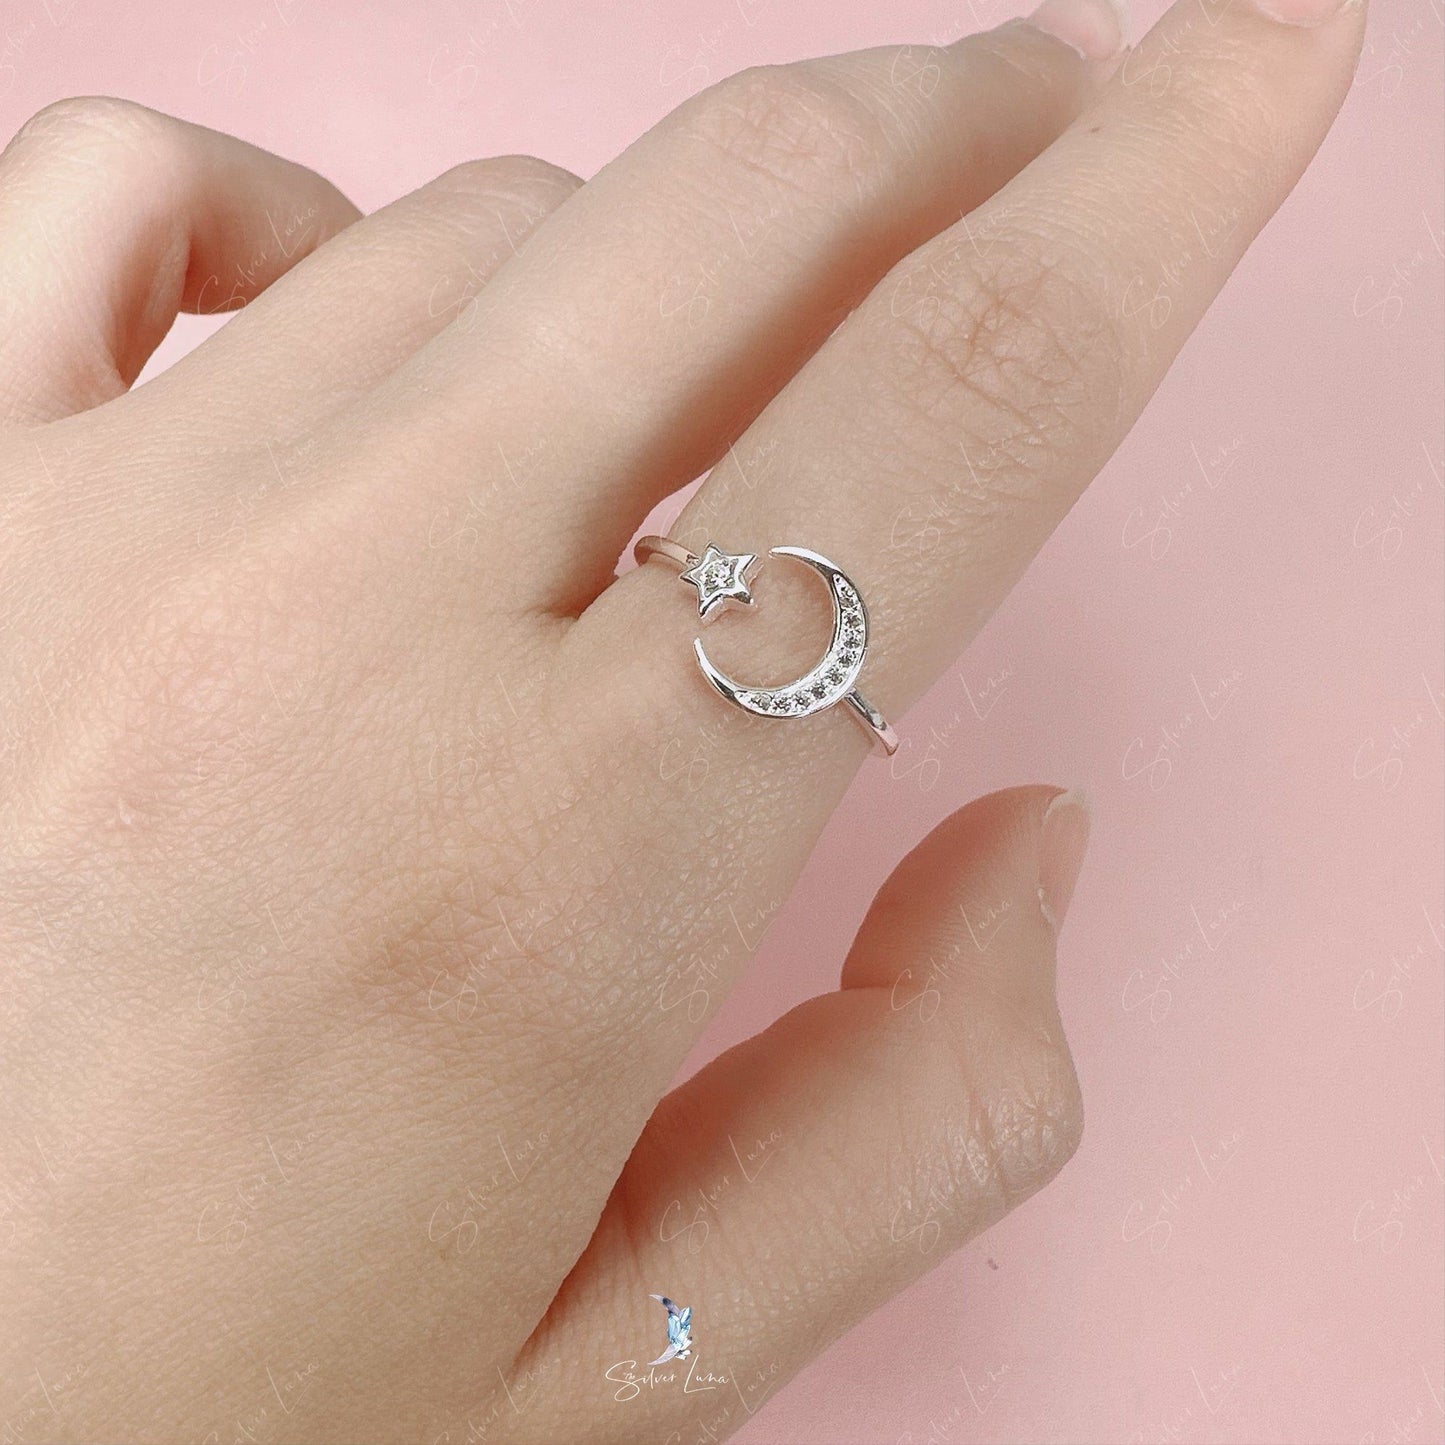 Crescent moon and star adjustable ring